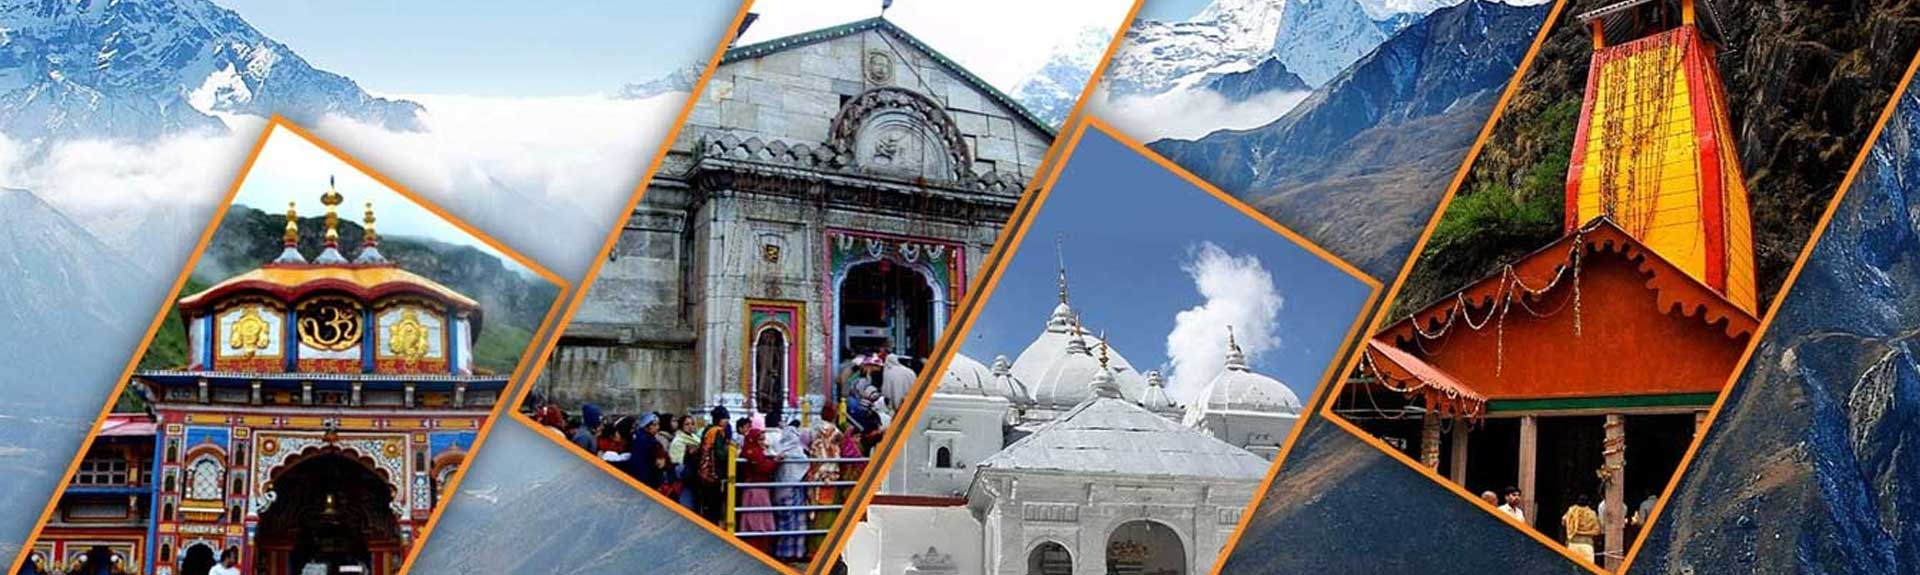 Deluxe Hotels for chardham yatra